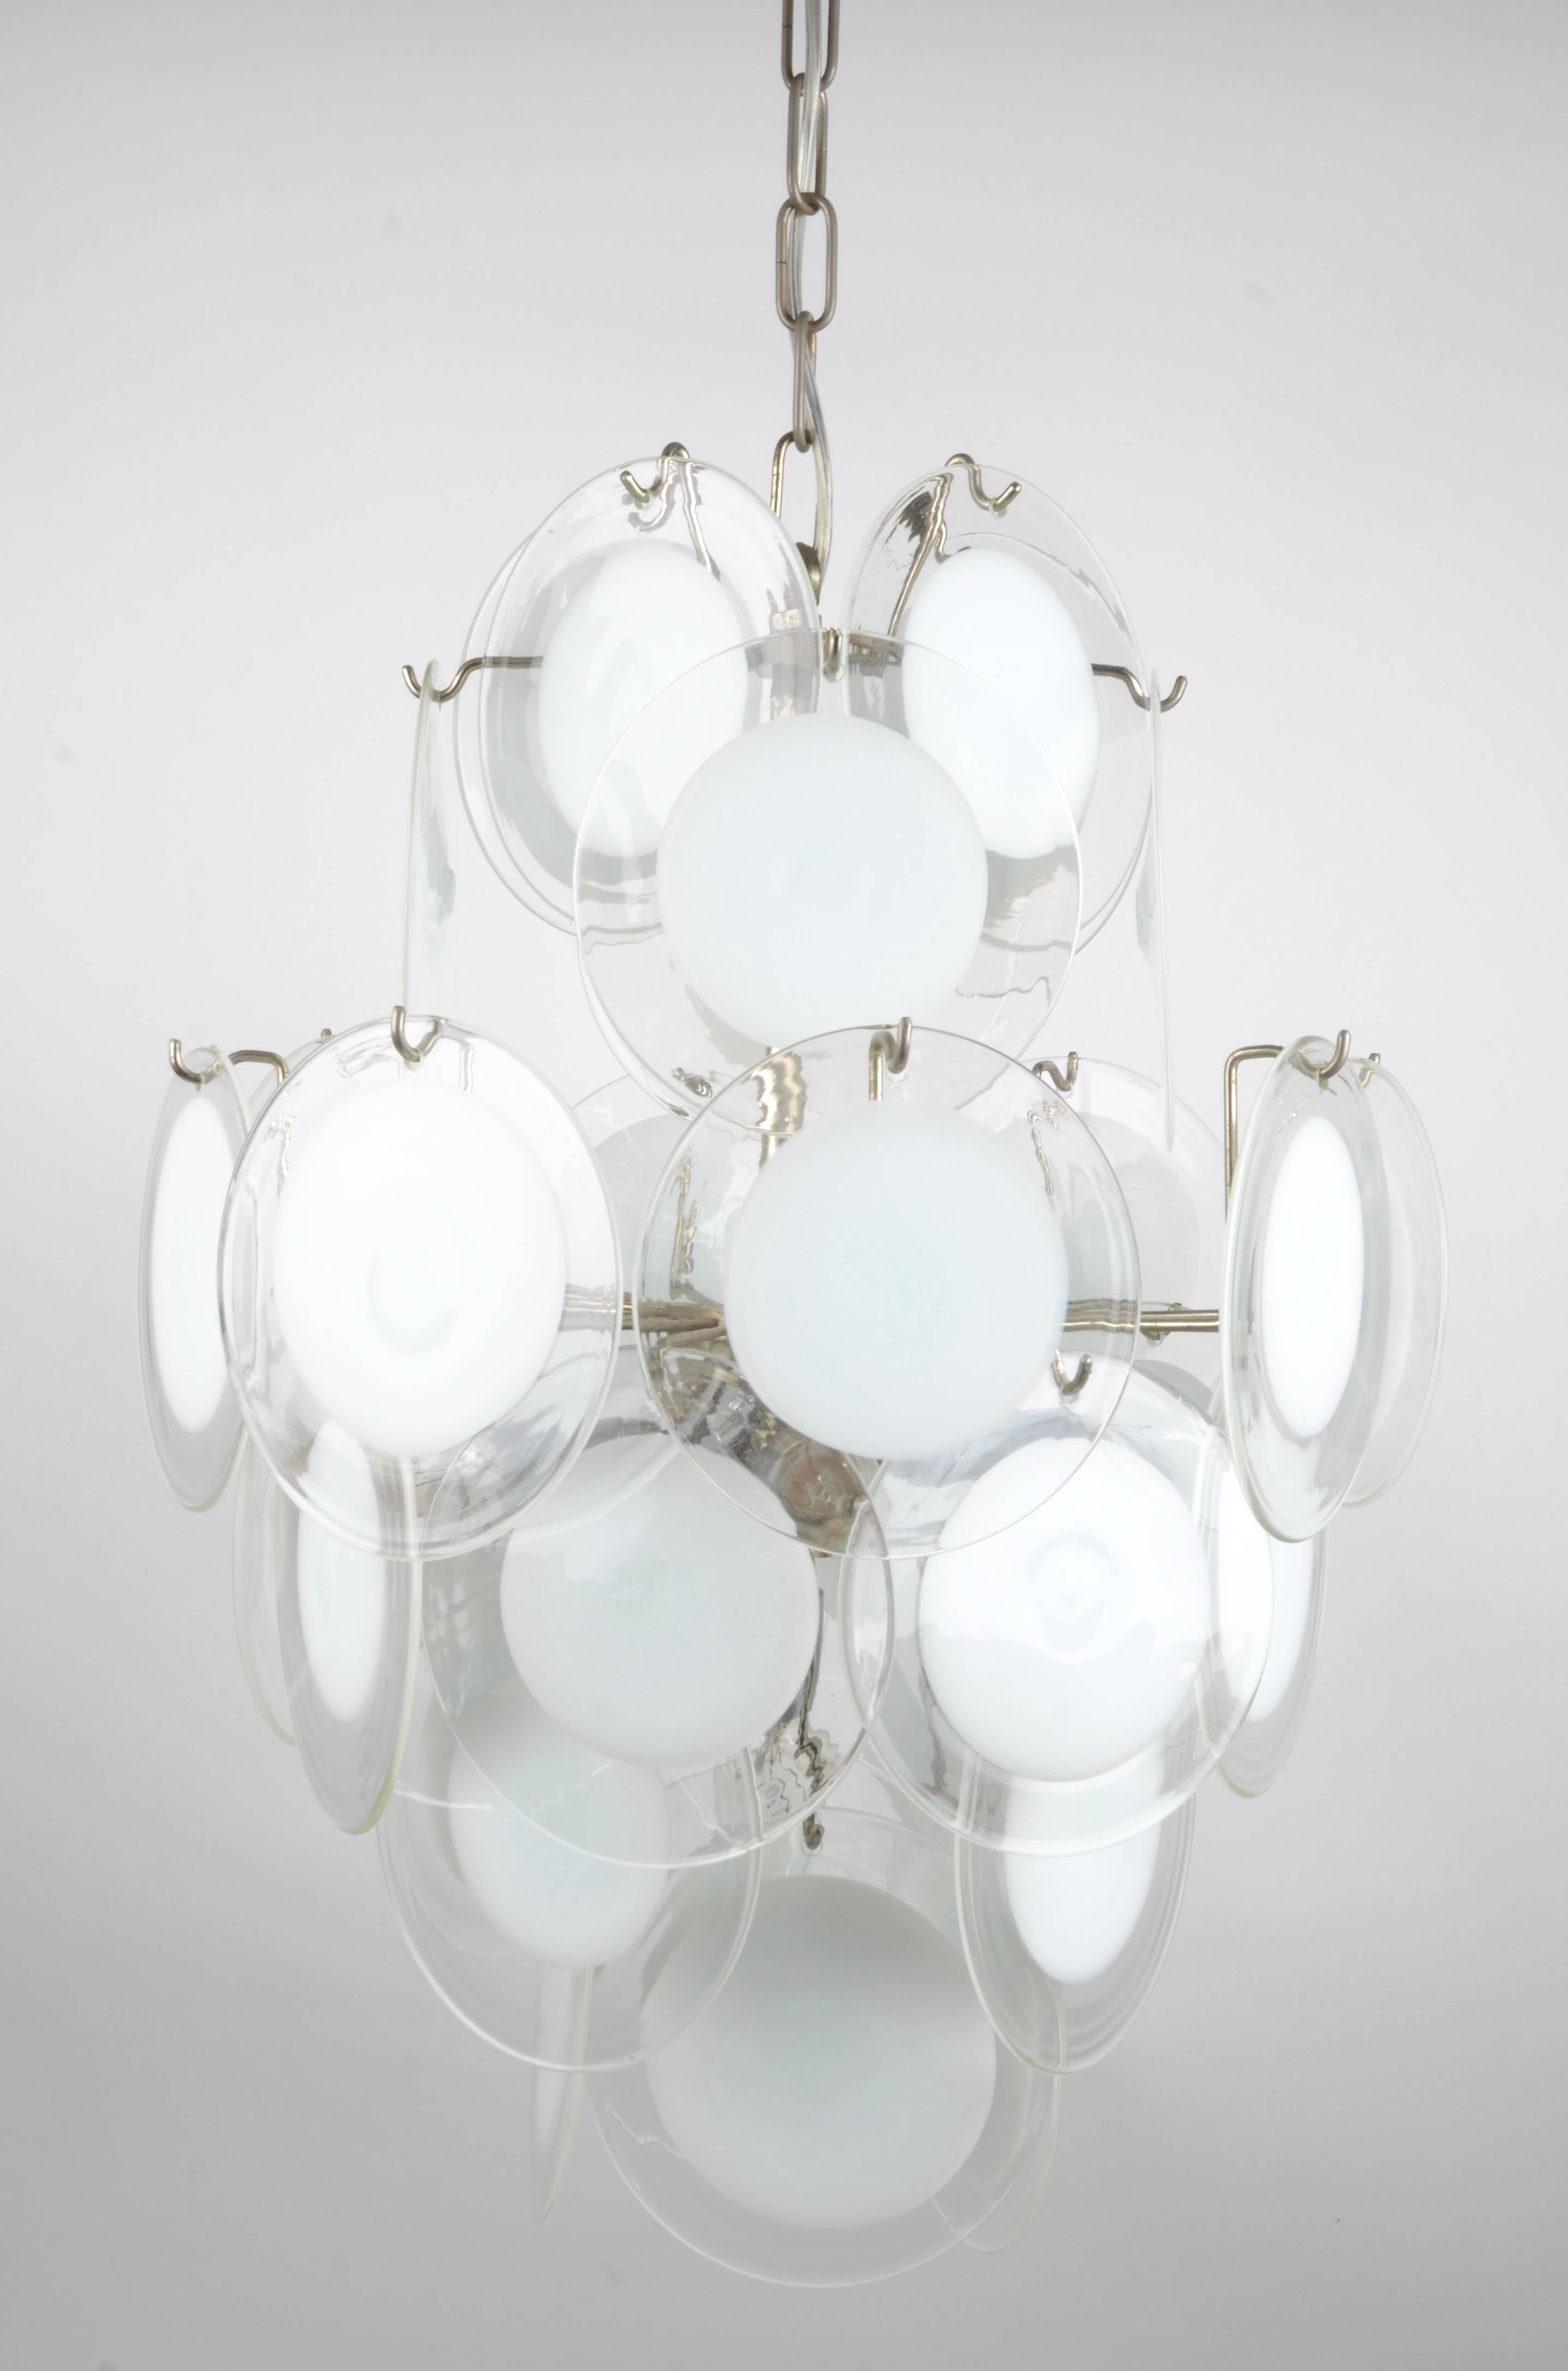 Chandelier with clear and white glass discs, made by Vistosi, Murino. Italy, 1970s.